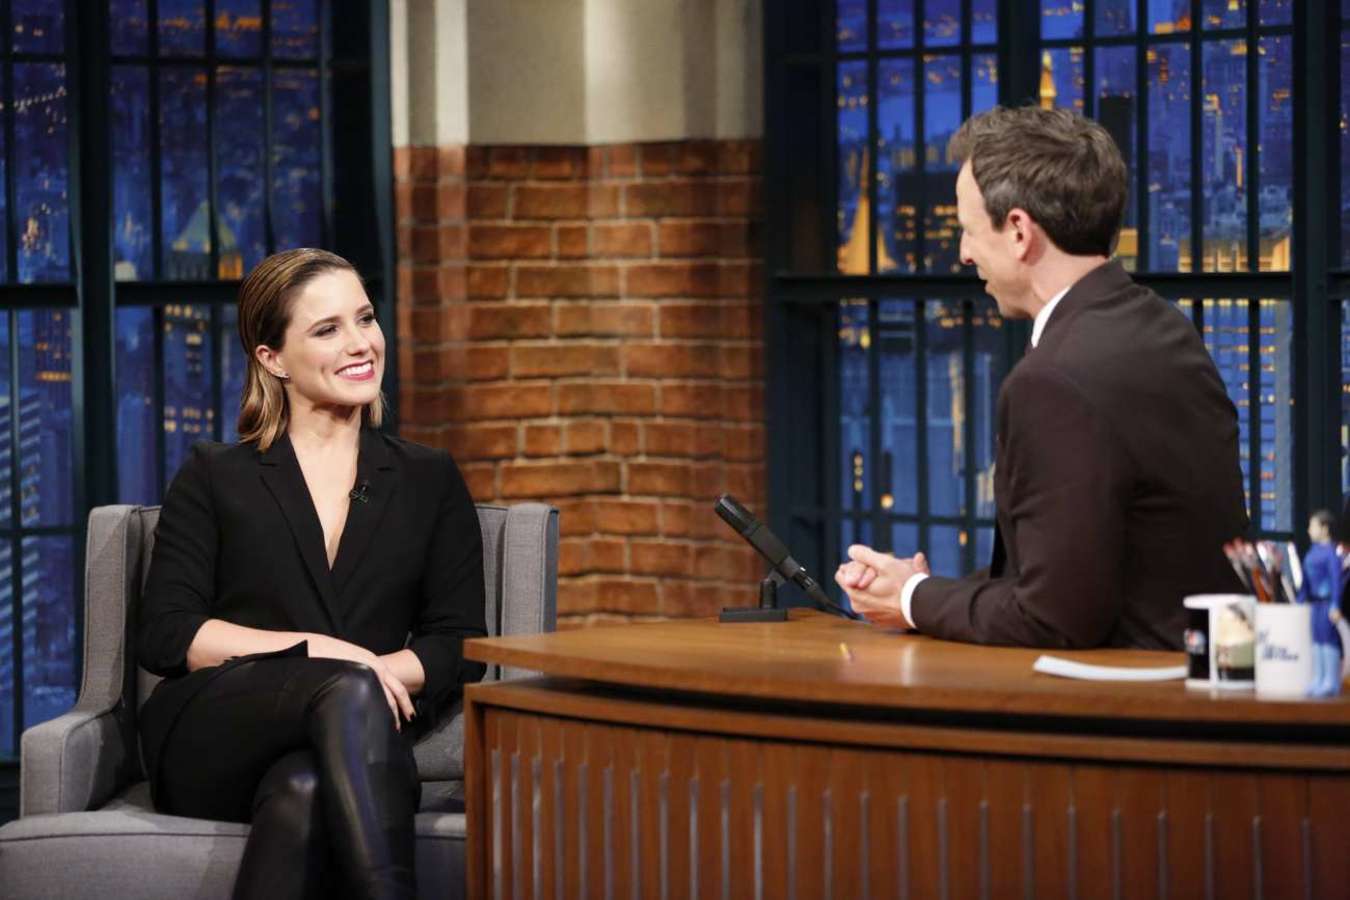 Sophia Bush during an interview with host Seth Meyers